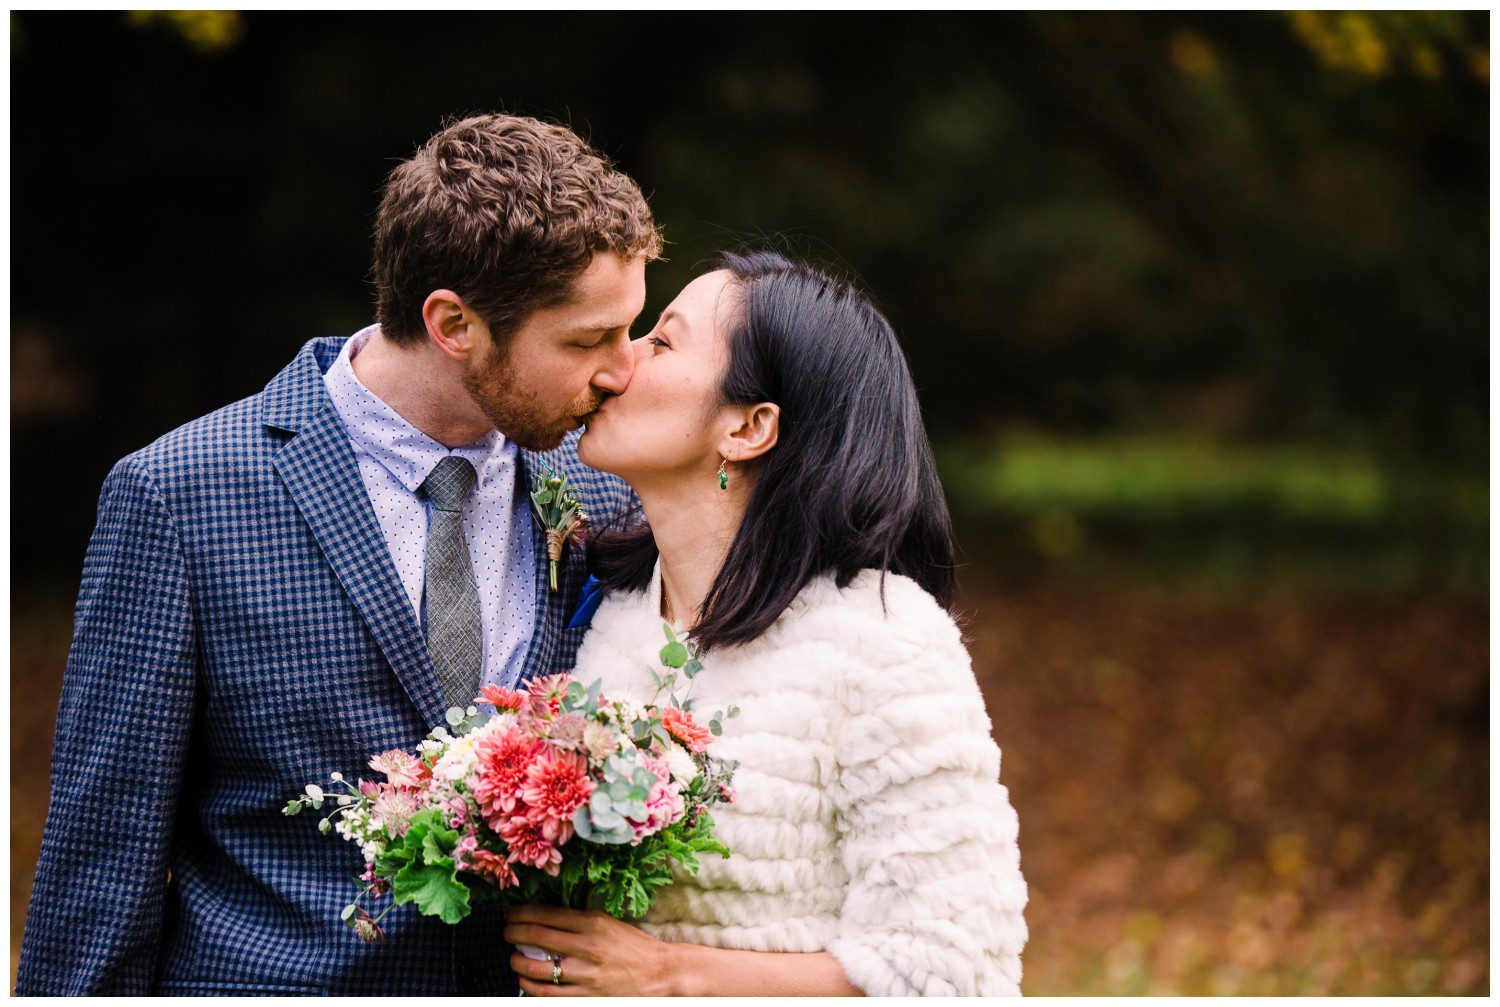 Elopement Photographer in Asheville, NC